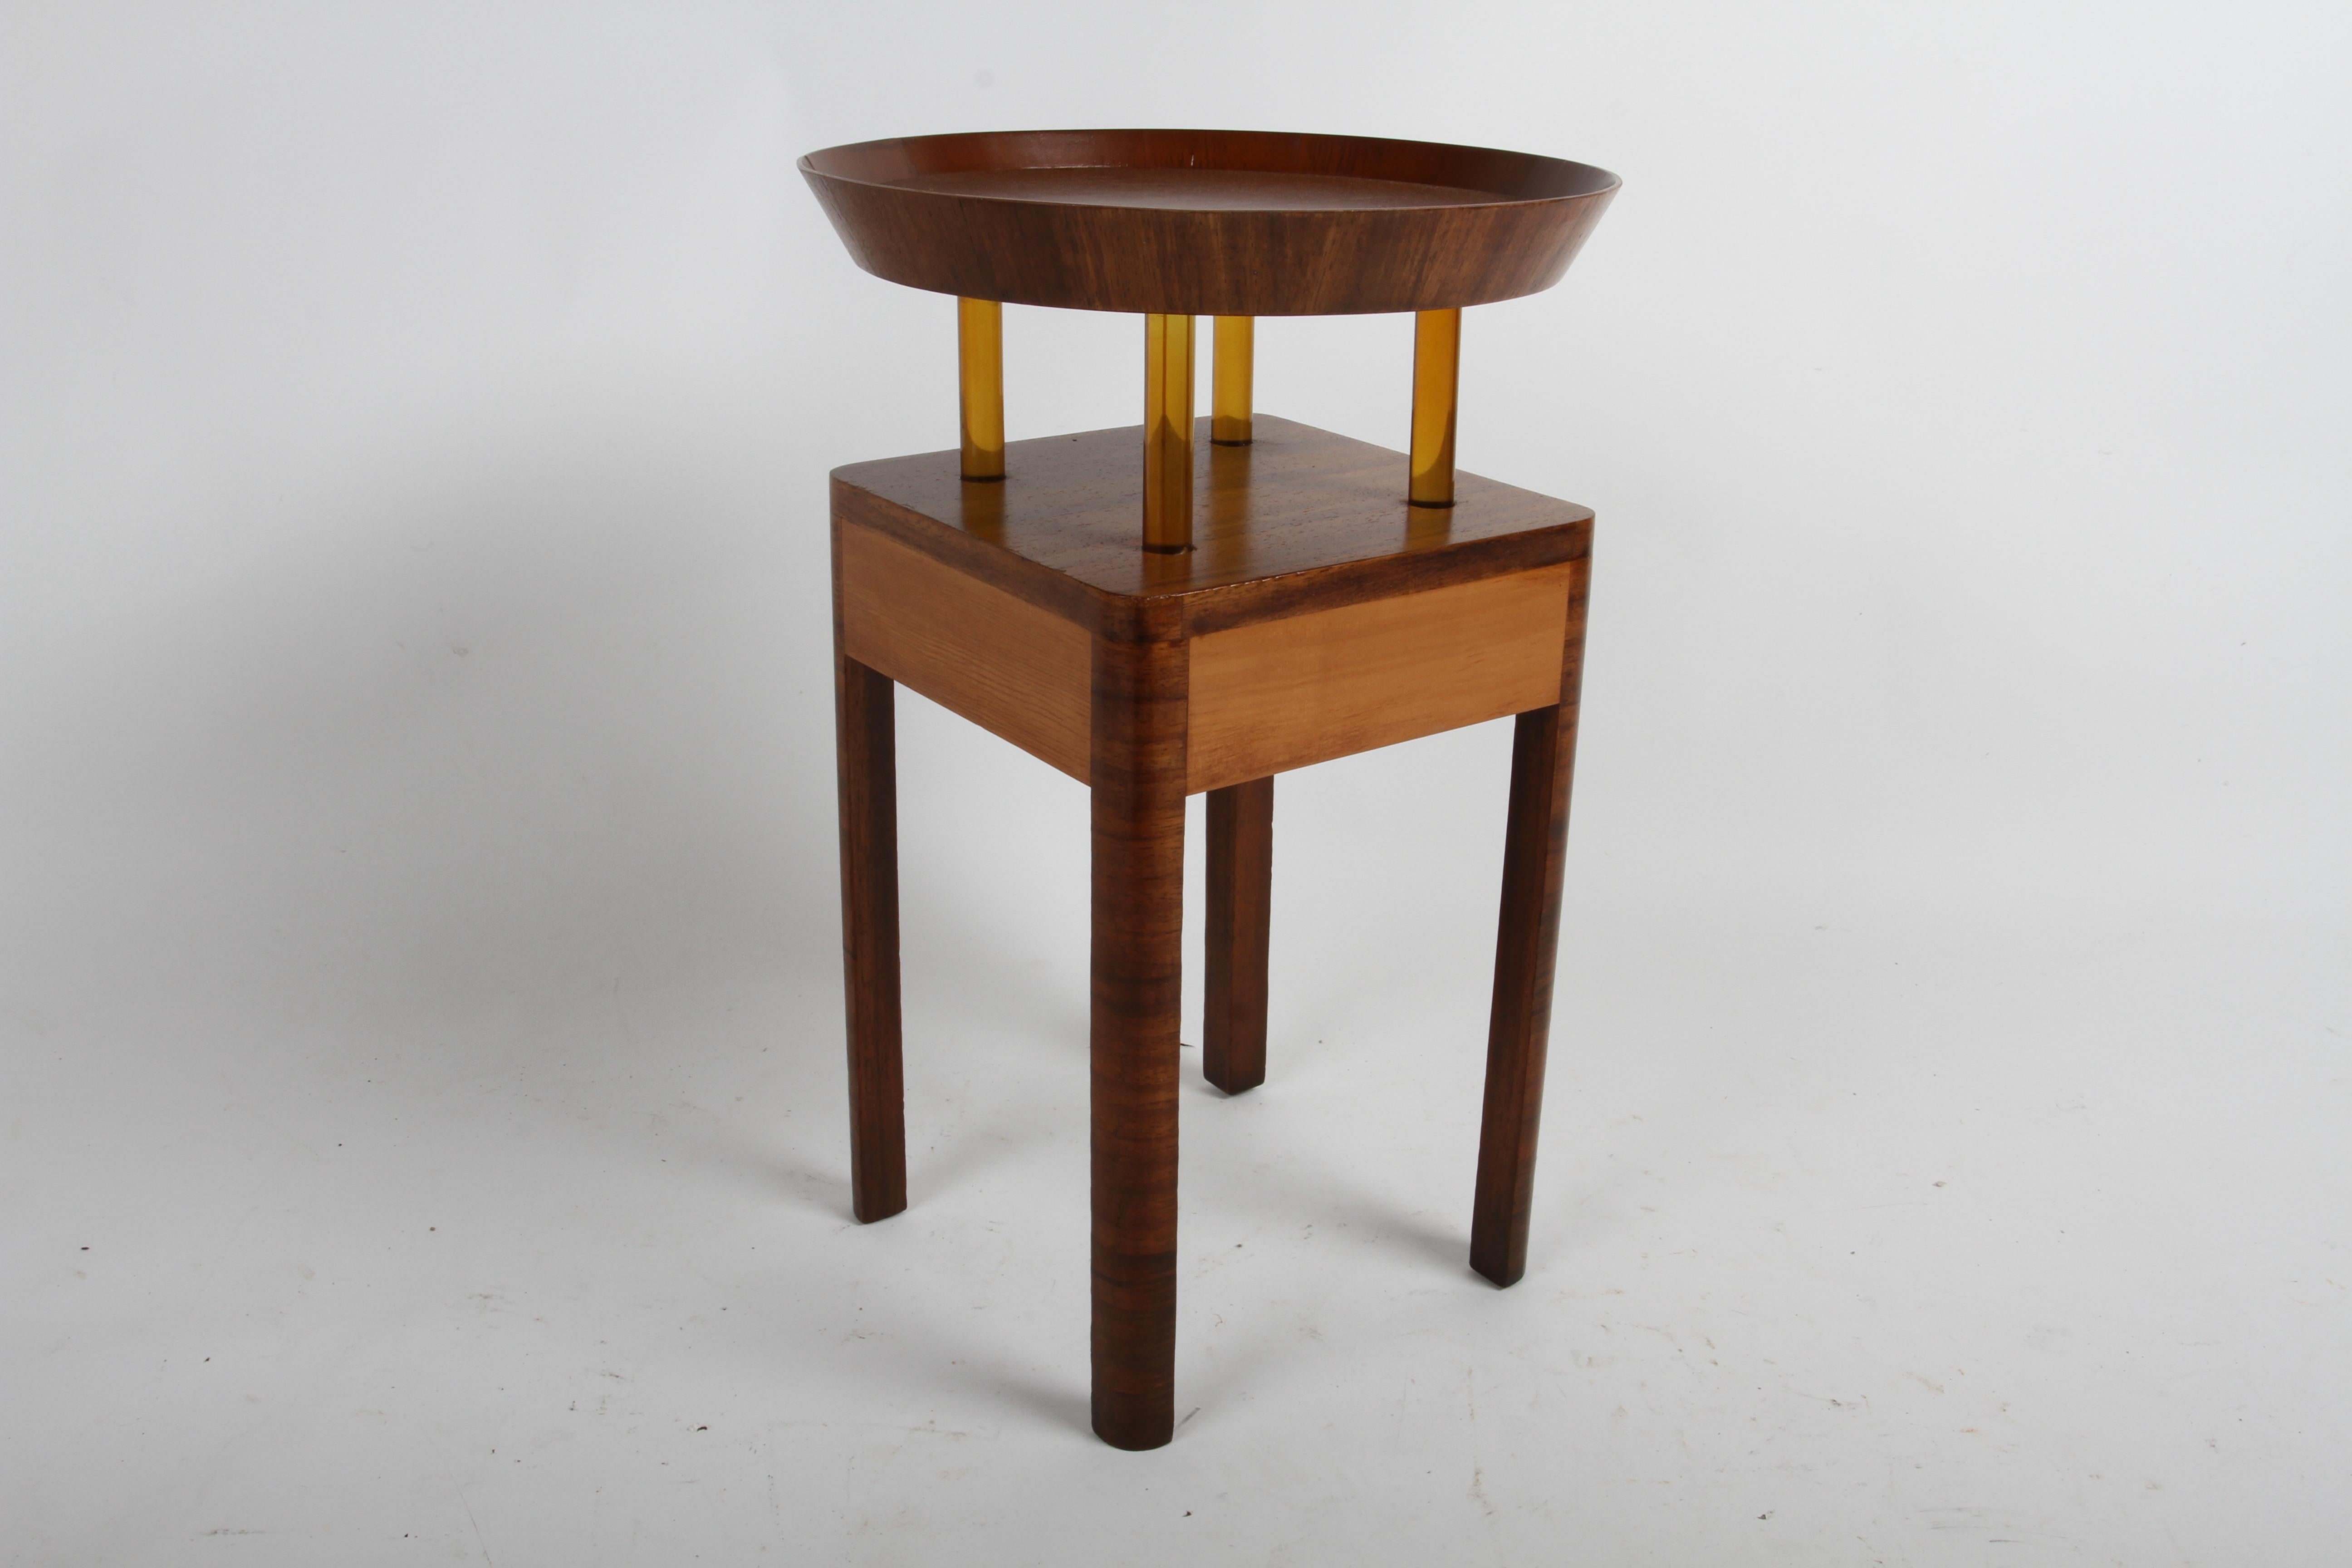 Rare Pair of 1940s Grosfeld House Round Tray Top End Table with Bakelite Details For Sale 11